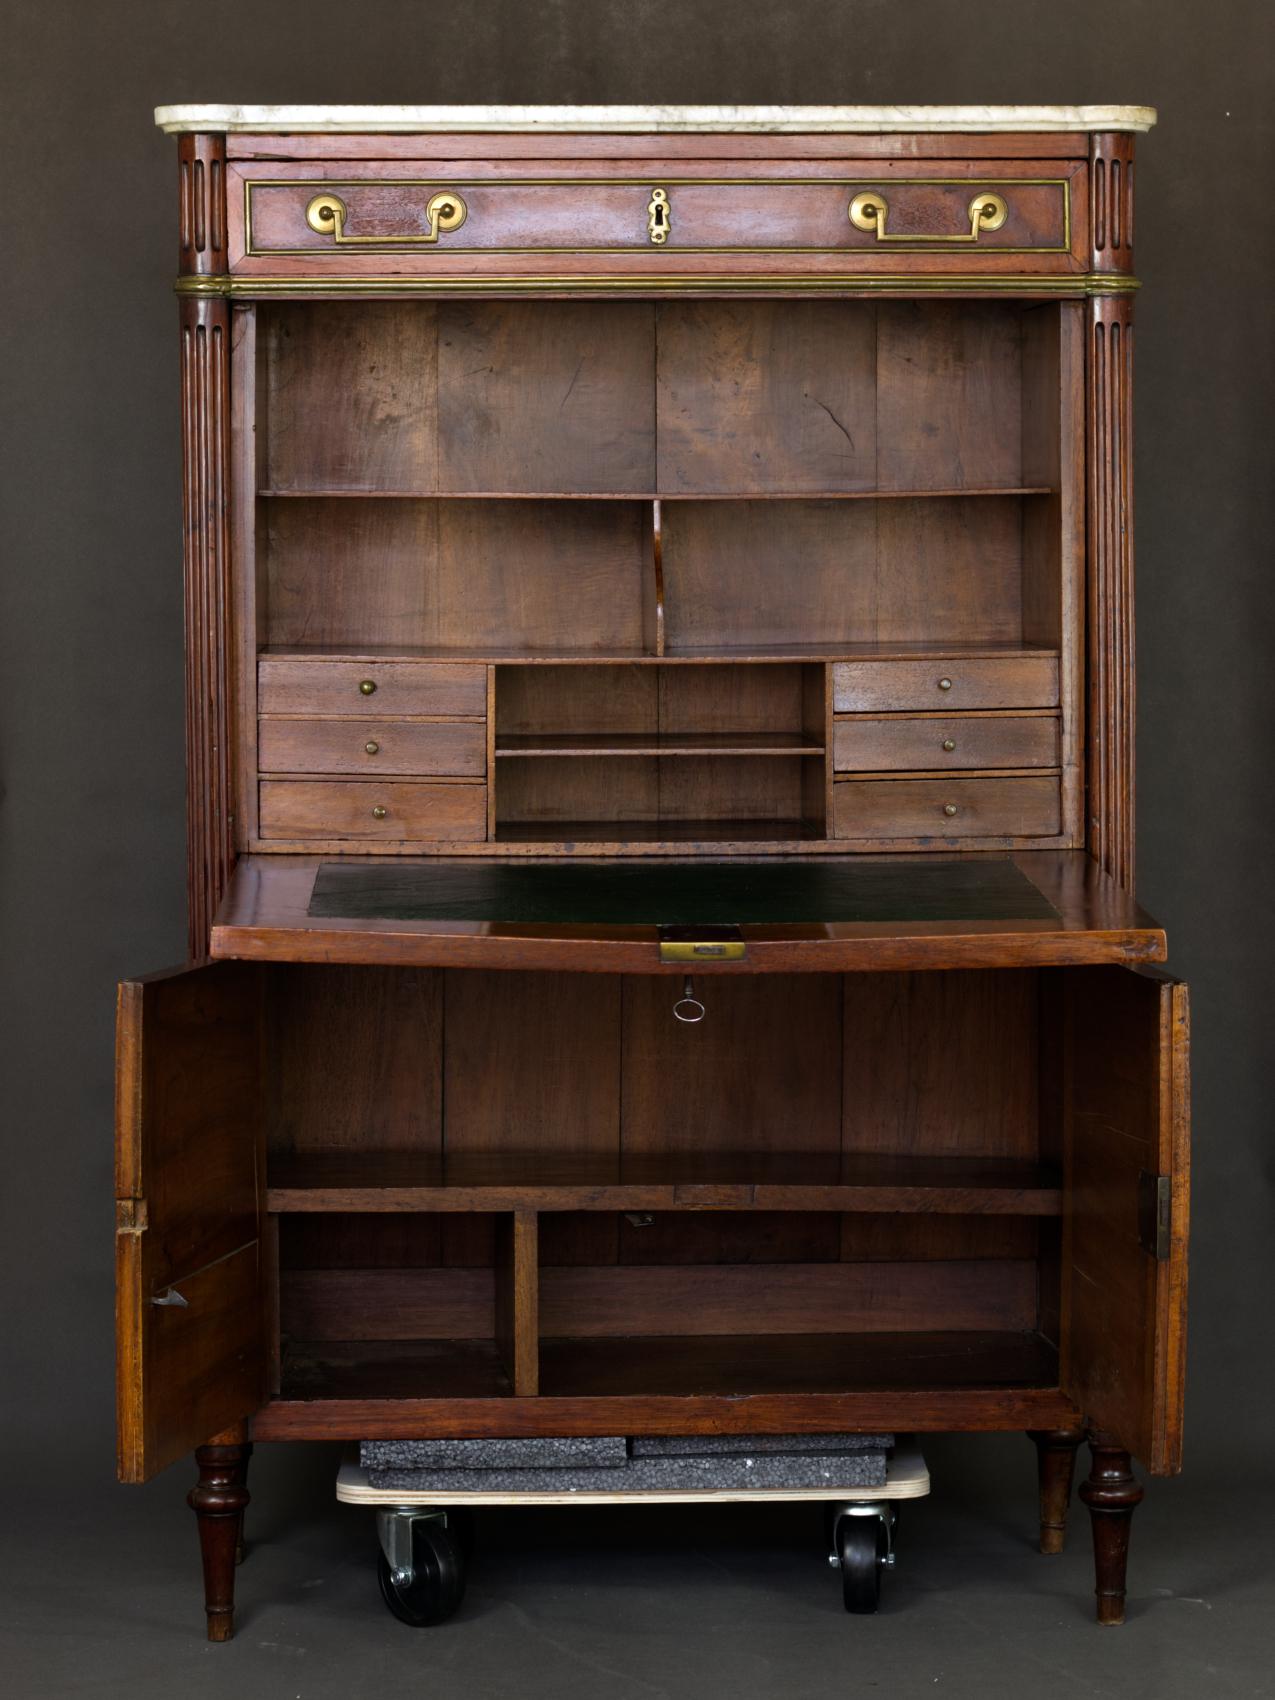 The secrétaire à abbatant or fall front desk is nearly identical to the desk 5th President James Monroe brought back from France in 1797. These desks are elegant examples of the popular style during the last decade of the 18th century. 
The Monroe